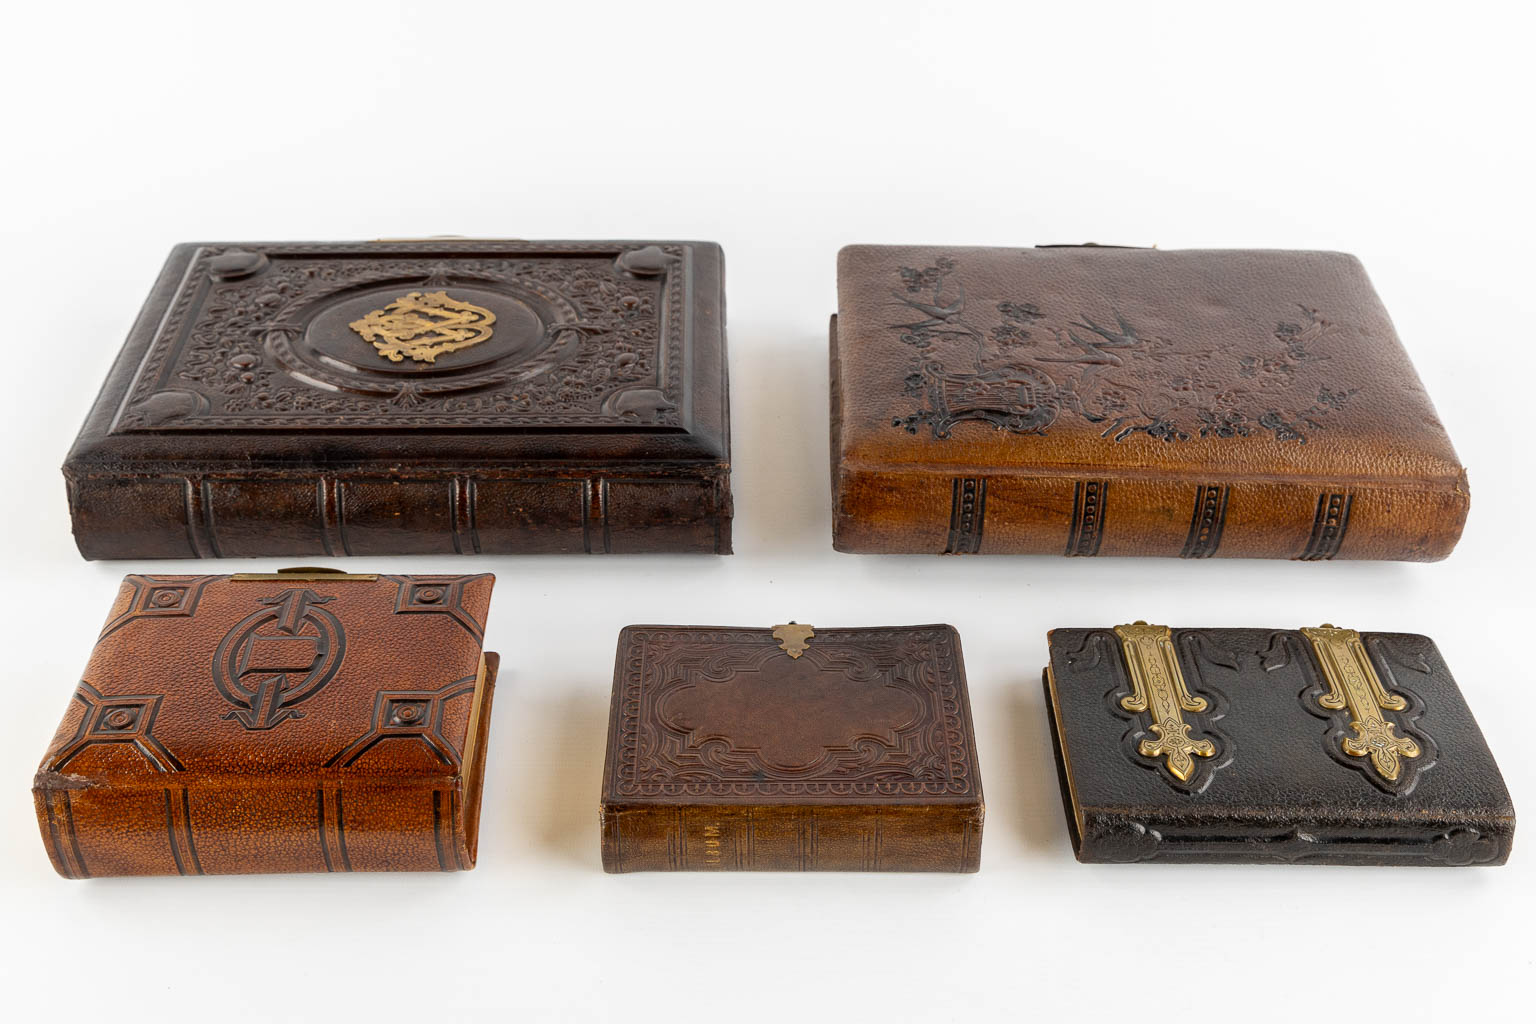 Five family photo books, of which 1 has a music box. (W:24 x H:30 cm) - Image 5 of 14